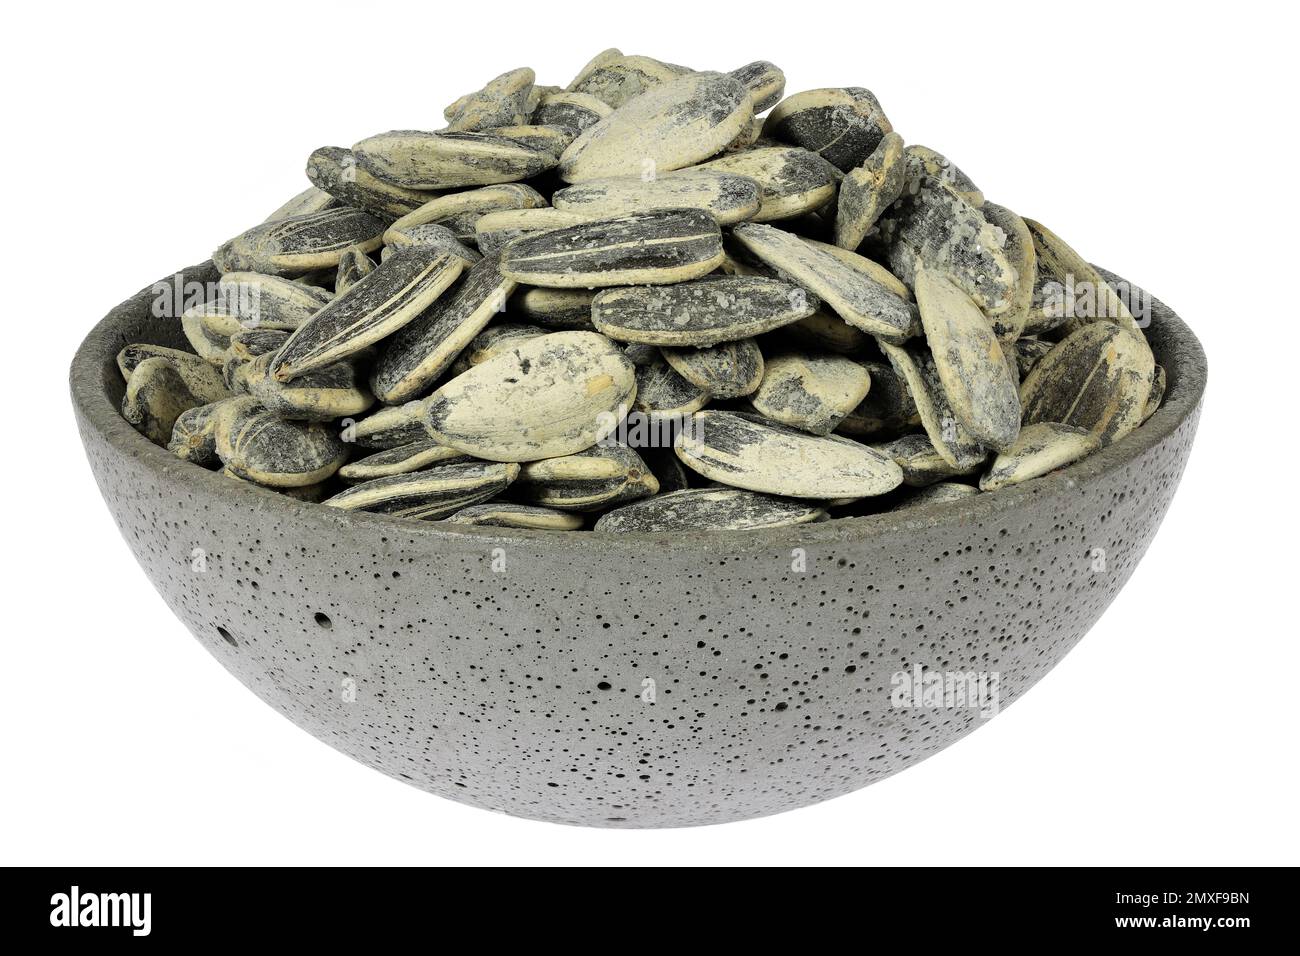 whole roasted and salted sunflower seeds in a concrete bowl isolated on white background Stock Photo